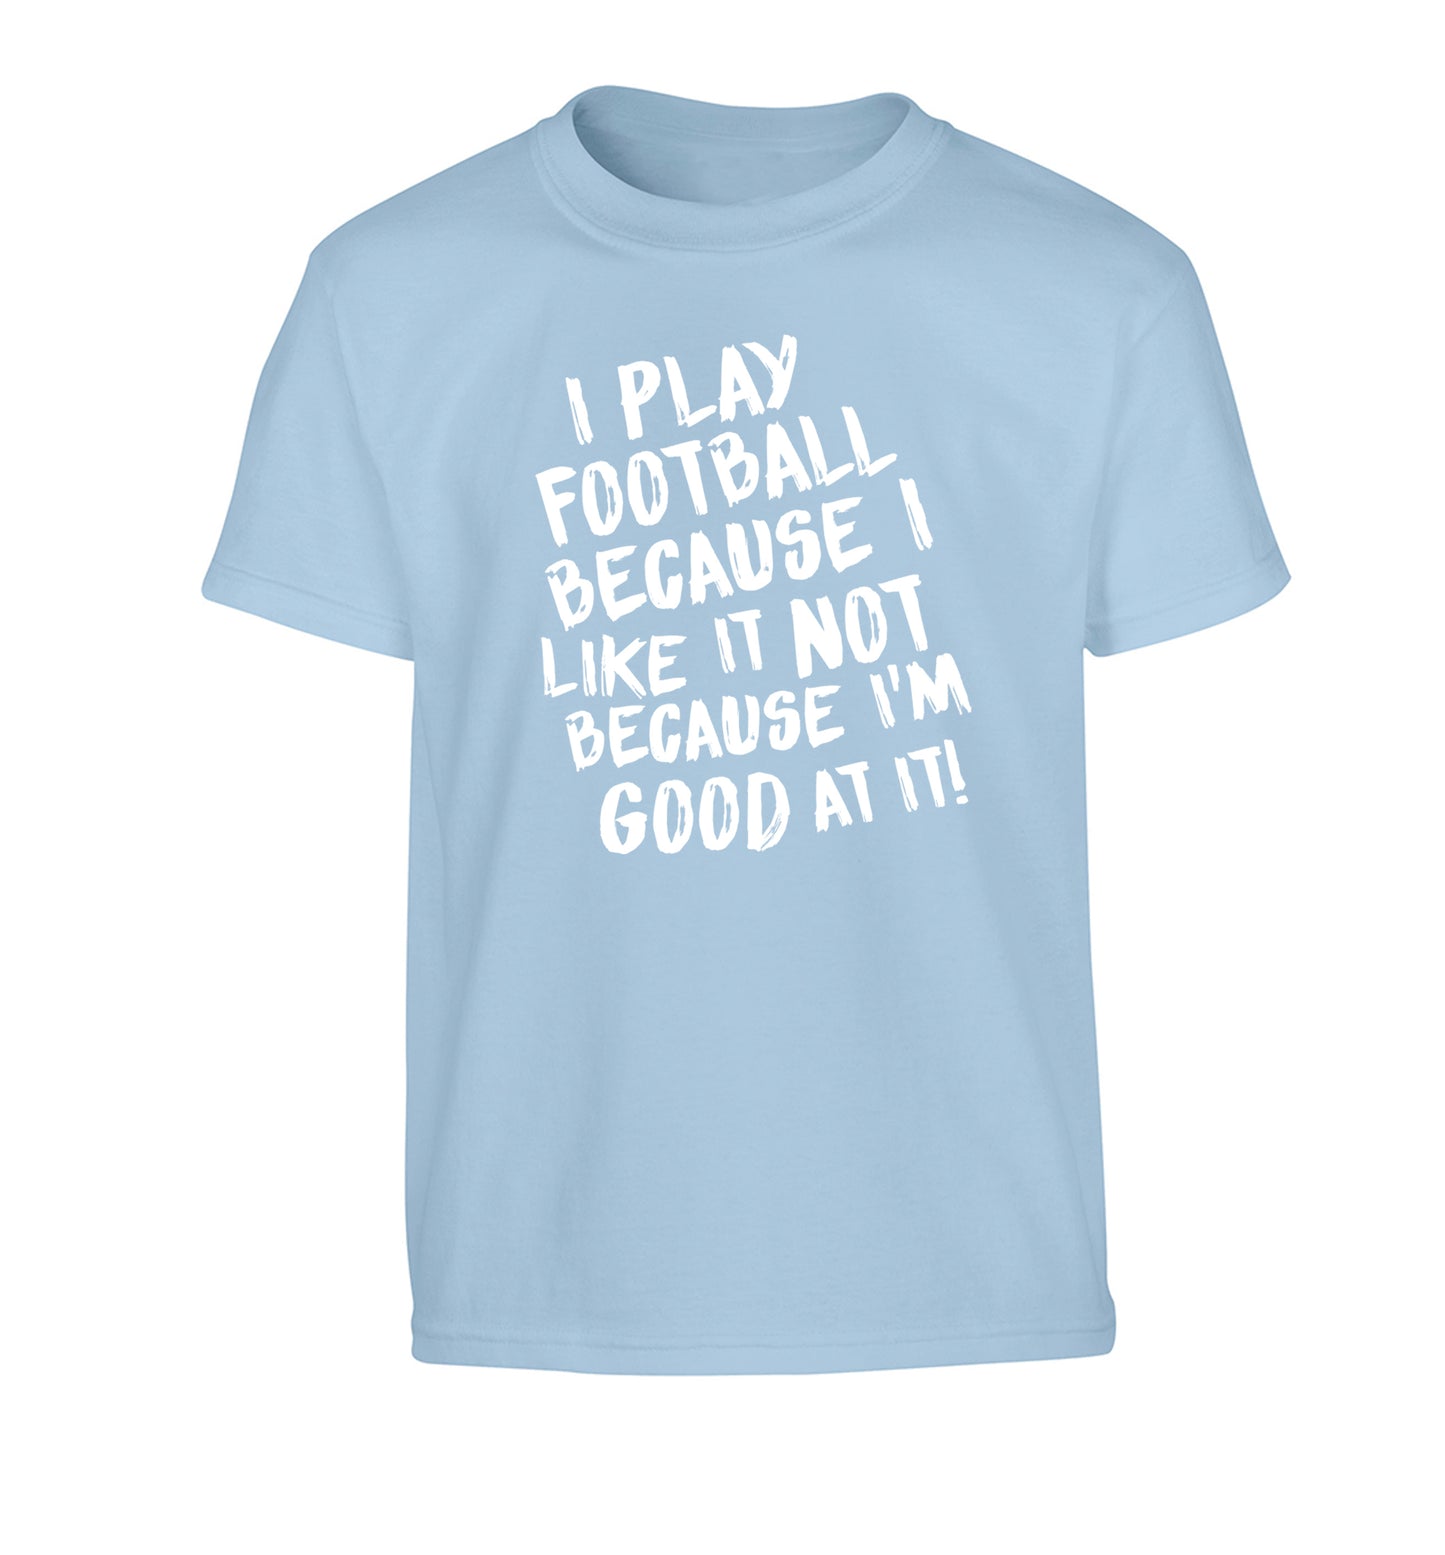 I play football because I like it not because I'm good at it Children's light blue Tshirt 12-14 Years